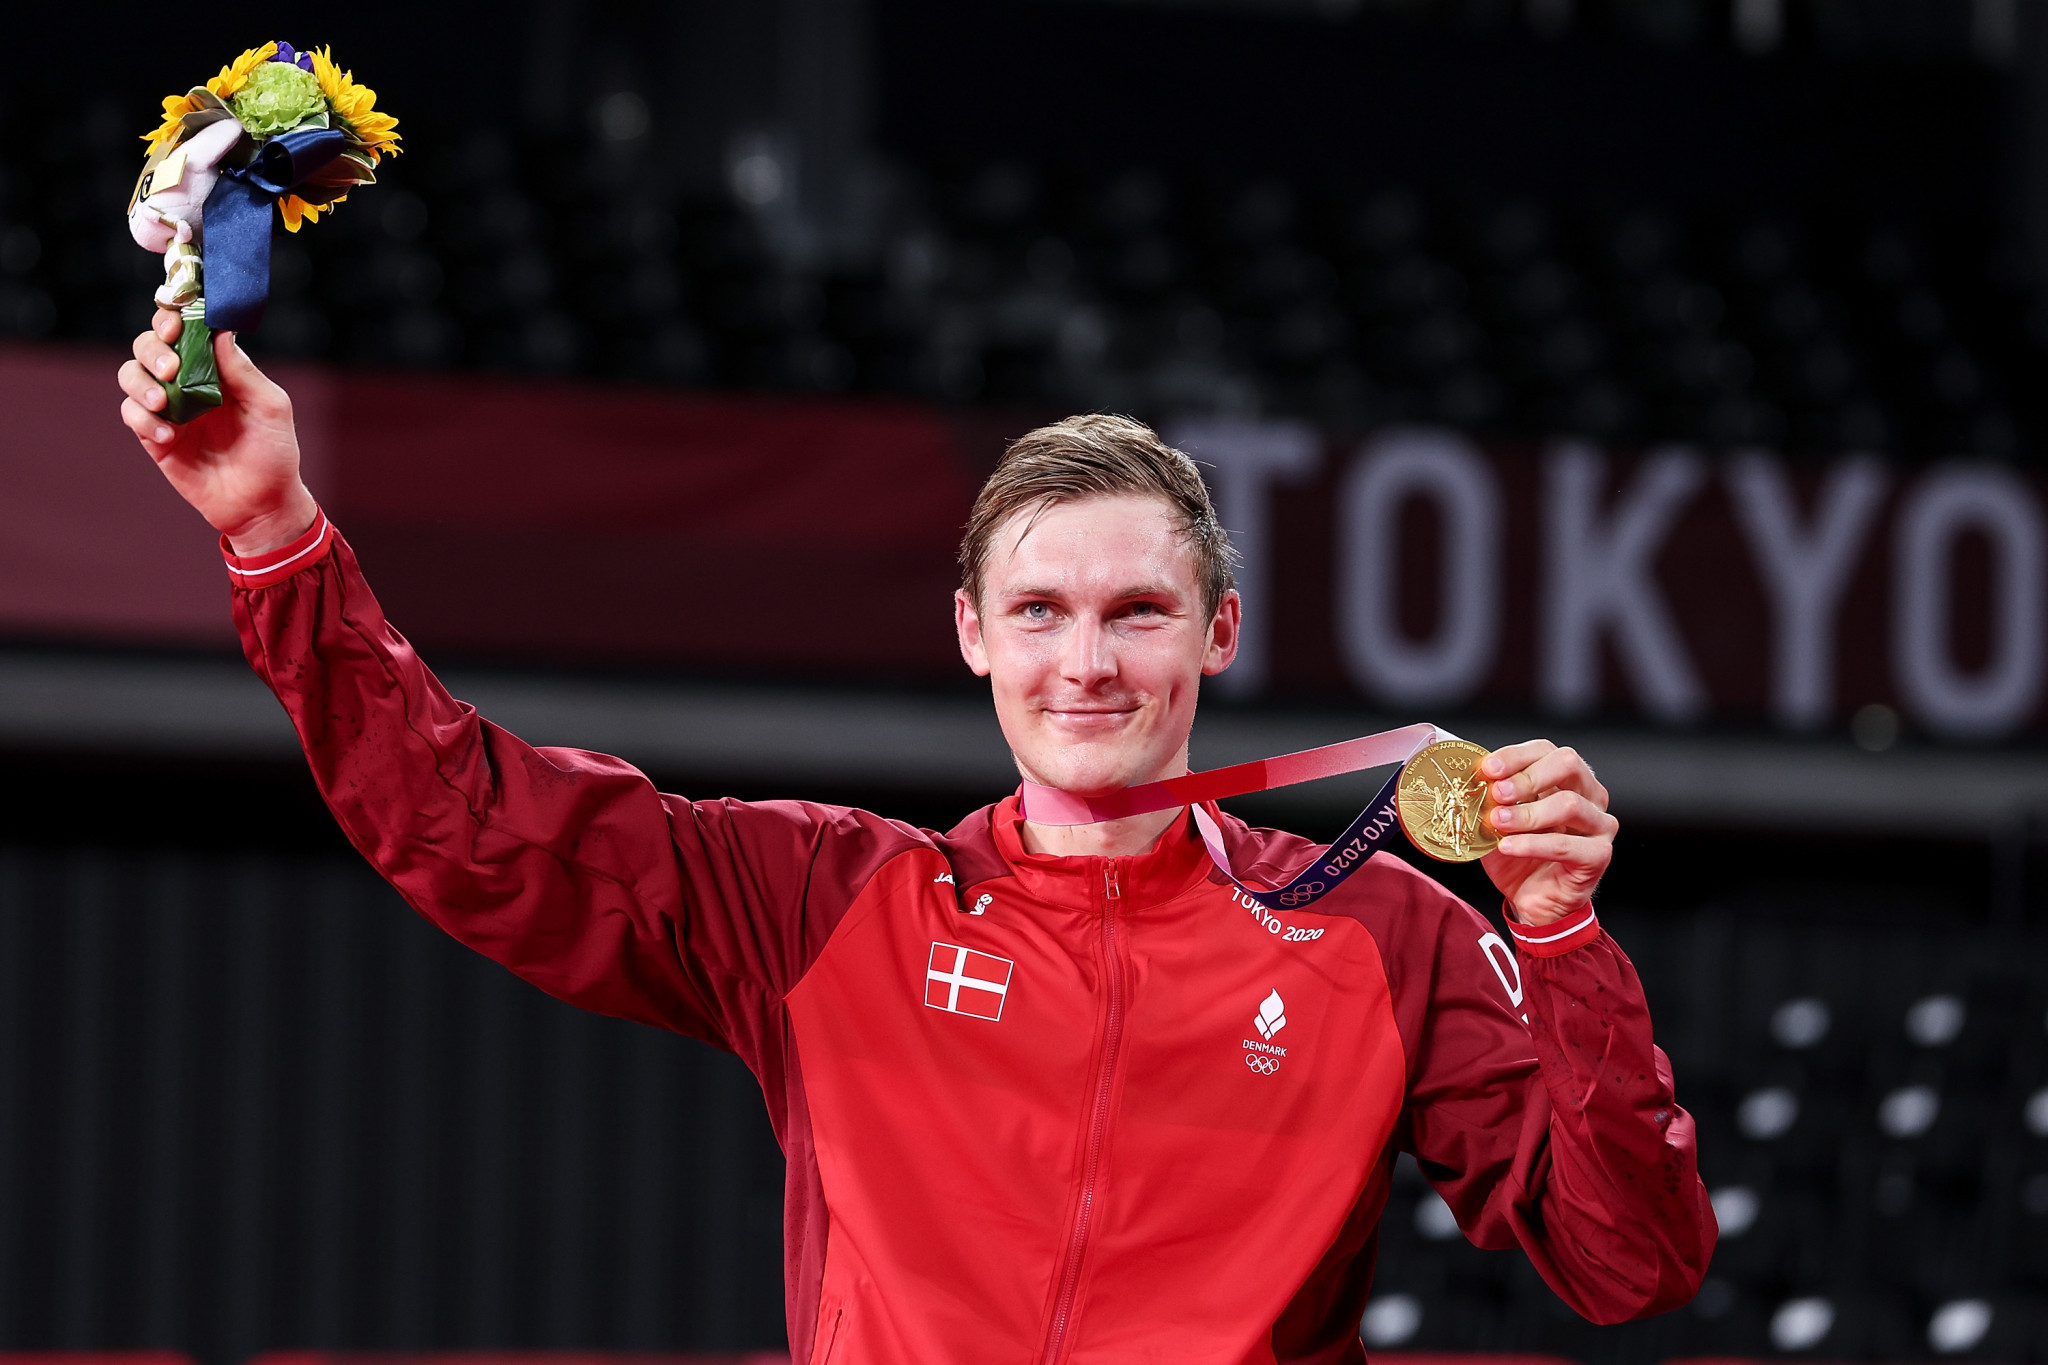 Viktor Axelsen and Tai Tzu-ying named BWF Male and Female Players of the Year